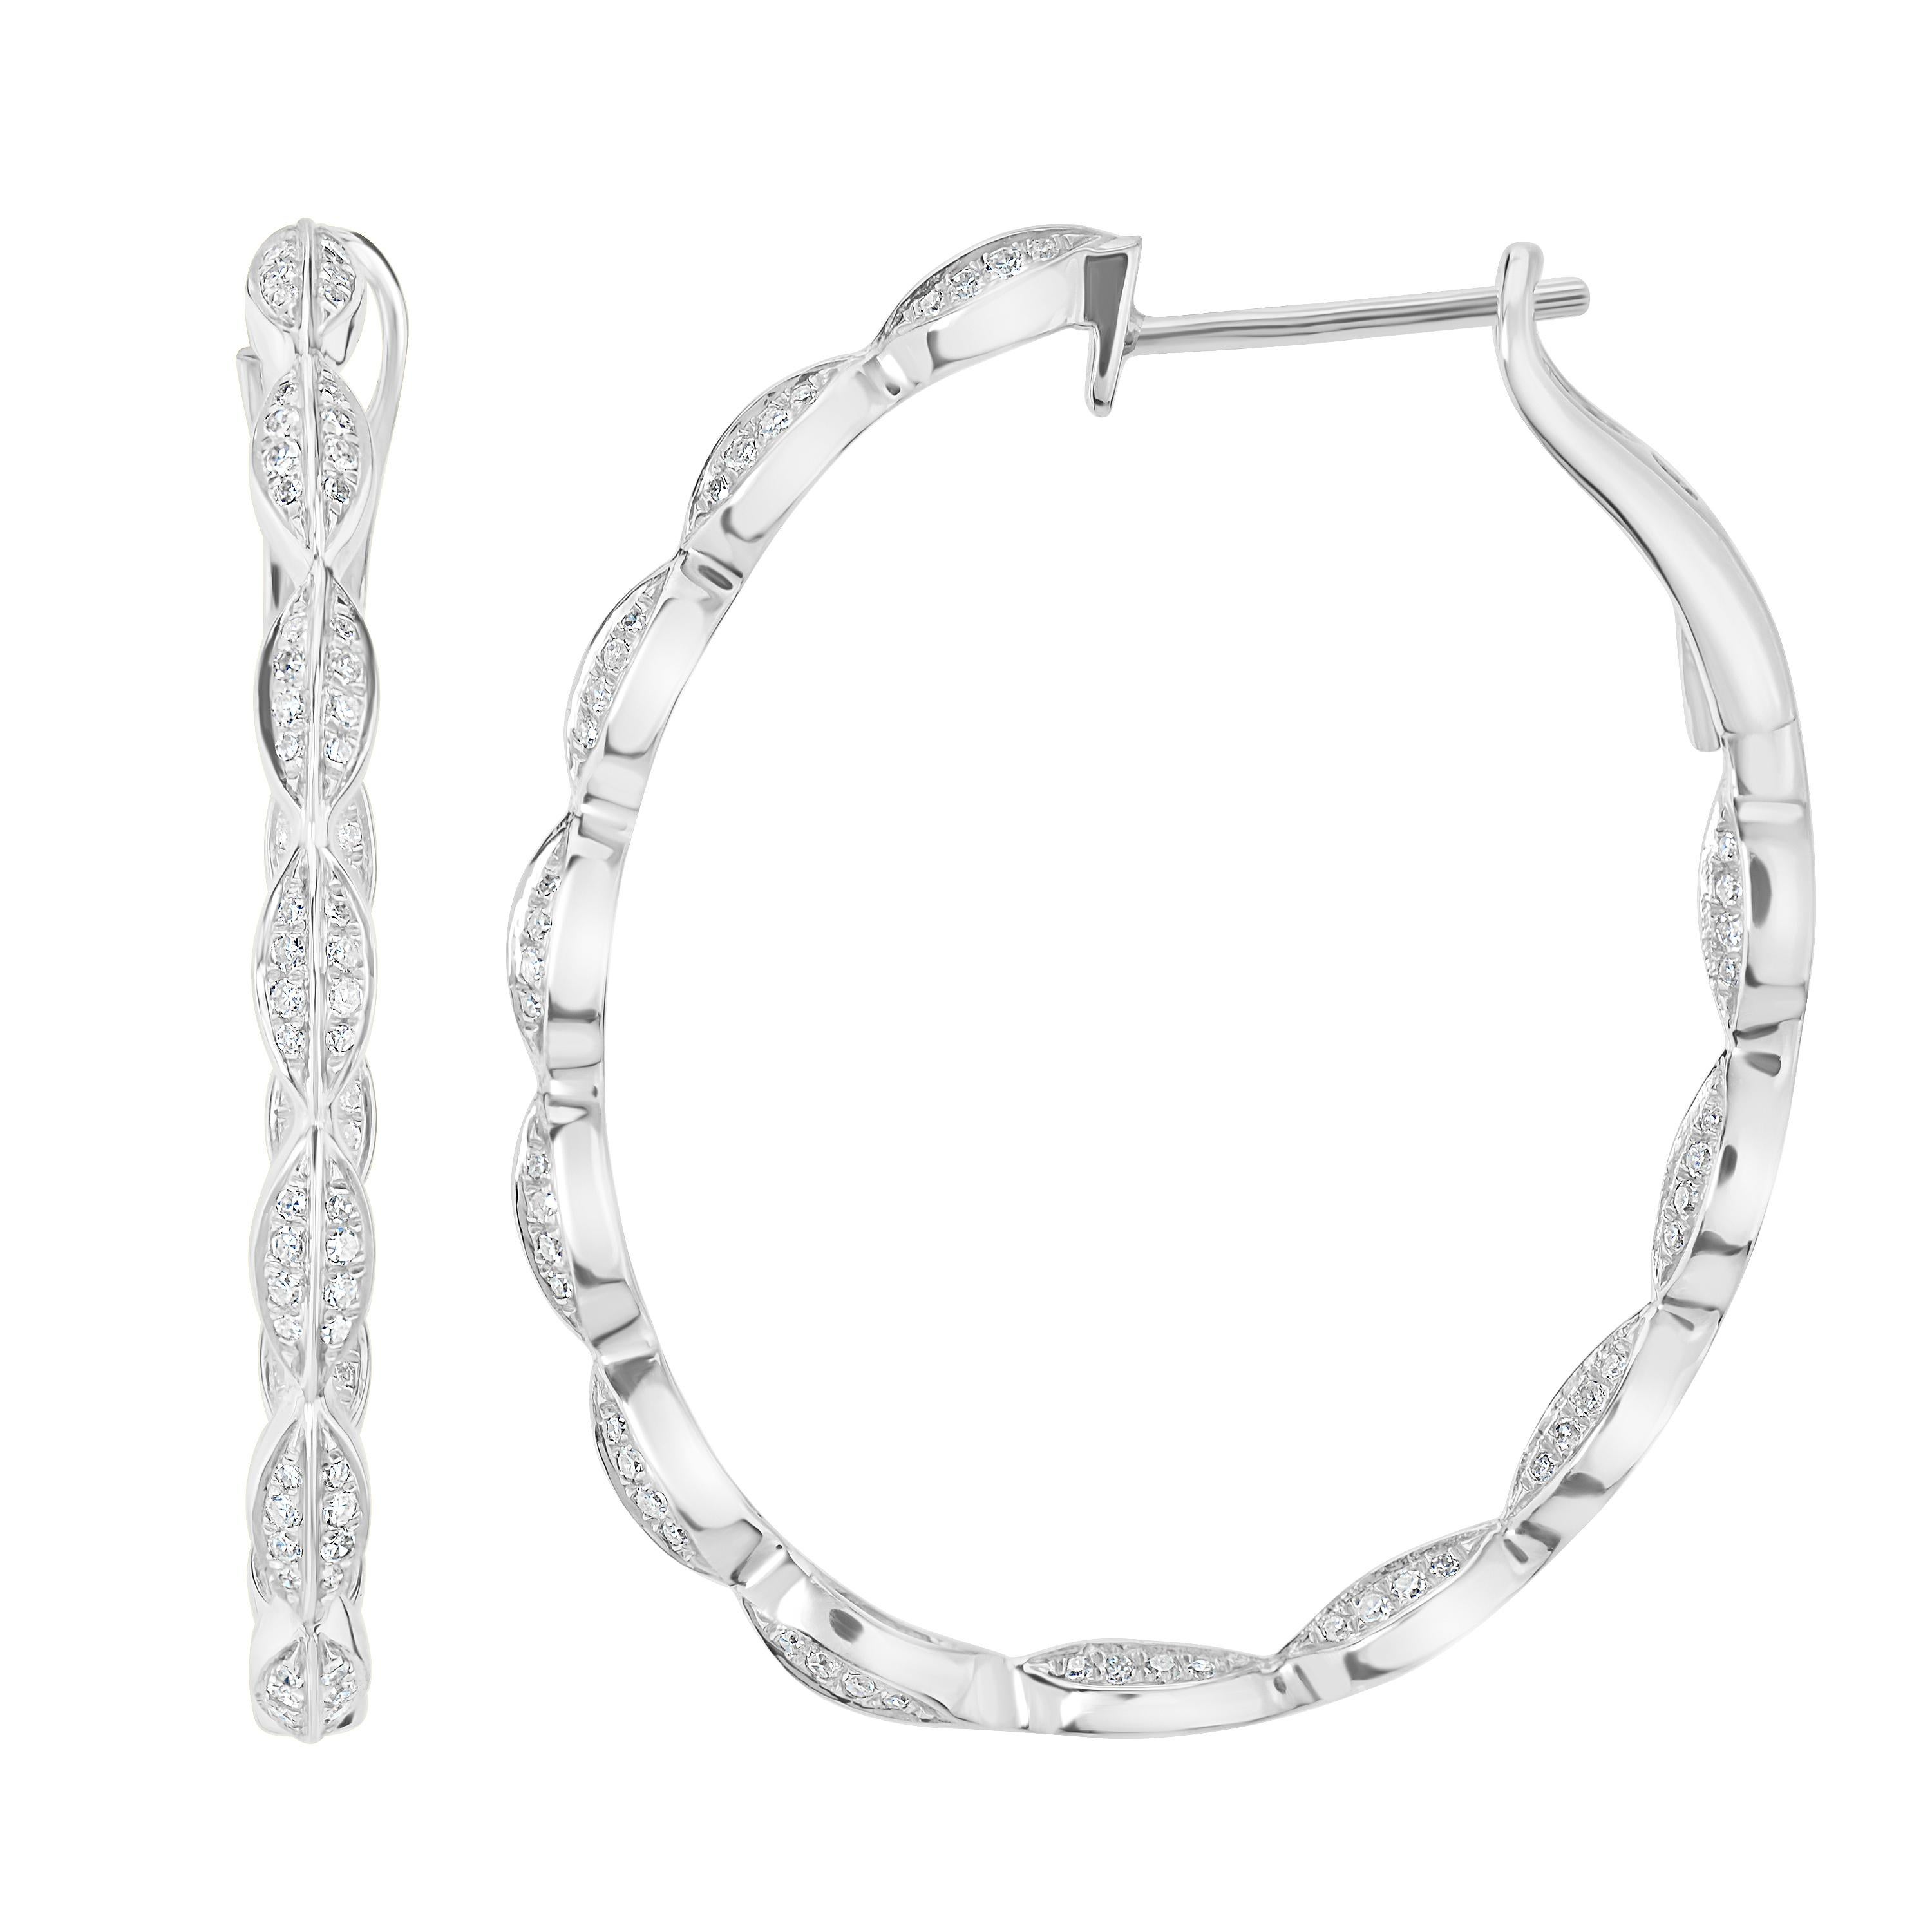 Gorgeous hoops featured with leaf motifs studded with diamonds. Each pair consists of 192 round diamonds in pave by Luxle. These earrings come with omega clasps for easy hassle-free wear.

Please follow the Luxury Jewels storefront to view the